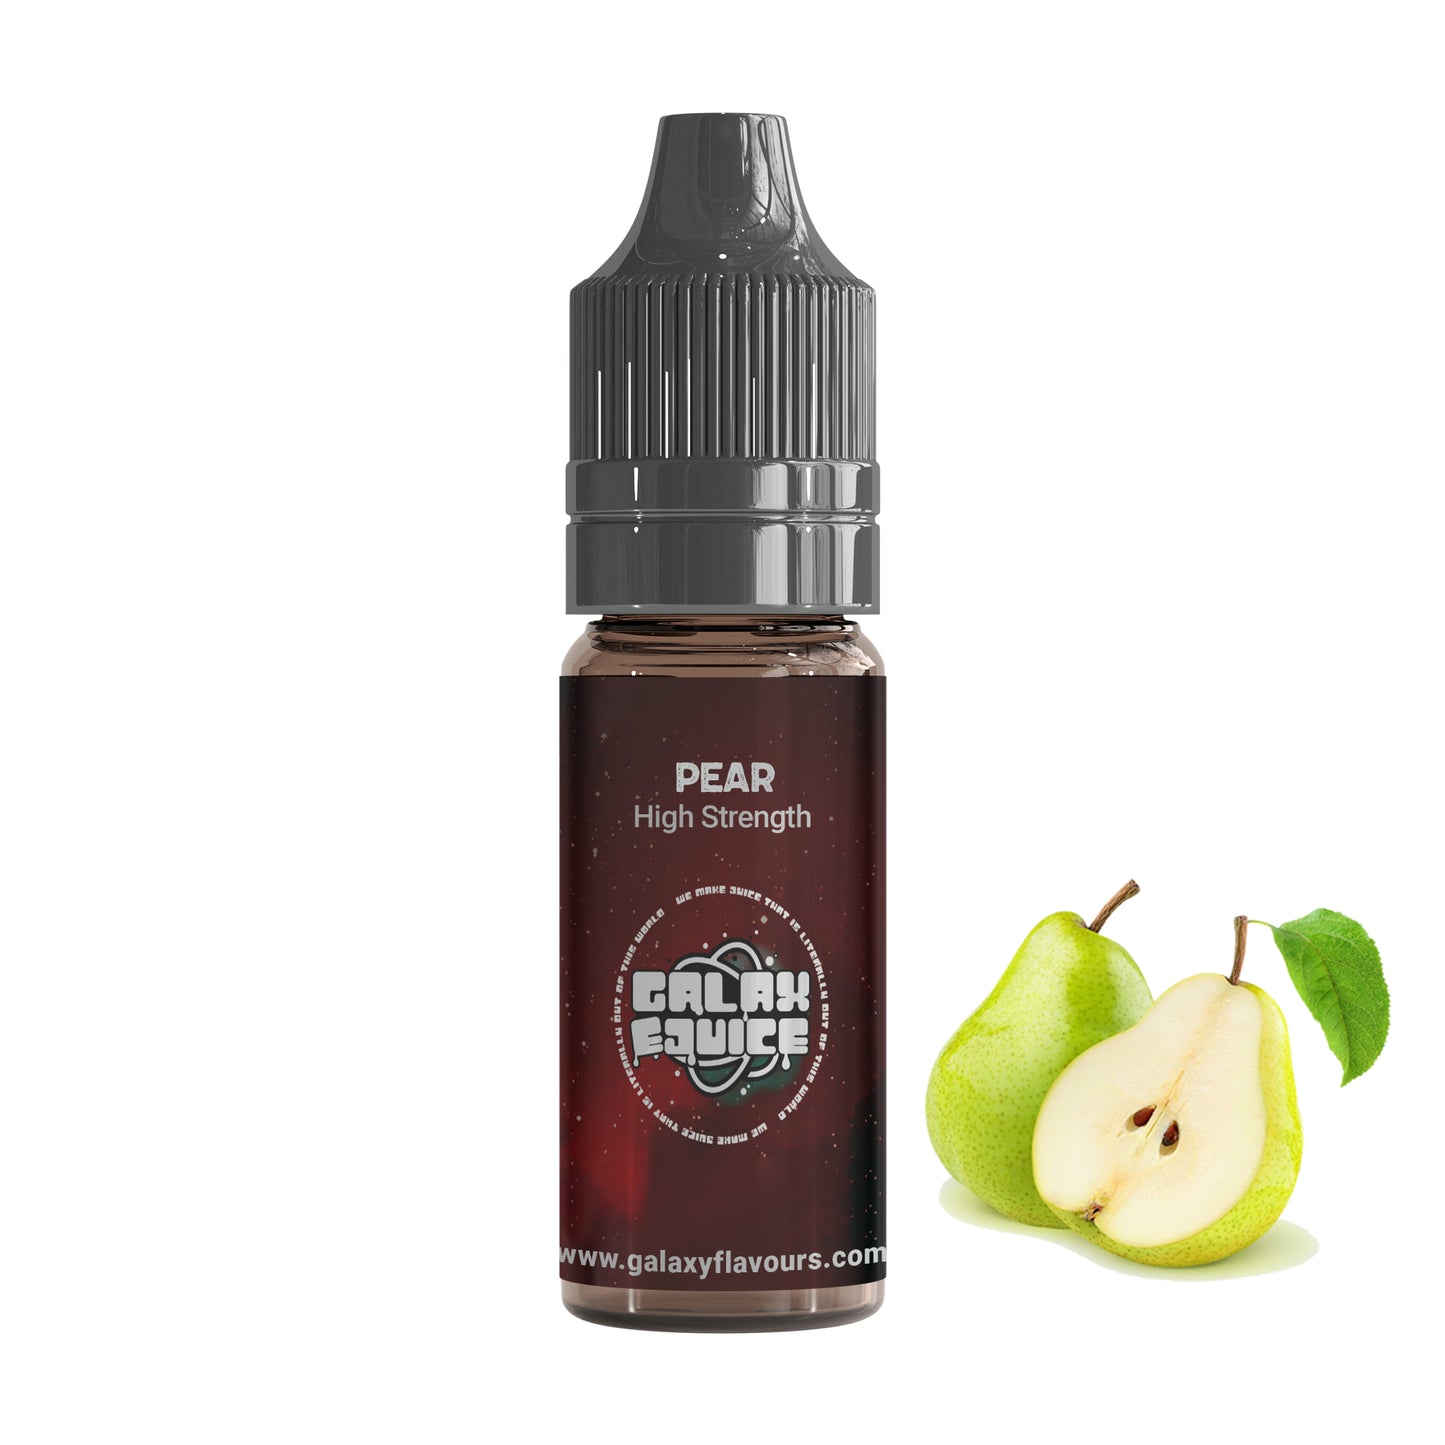 Pear High Strength Professional Flavouring.